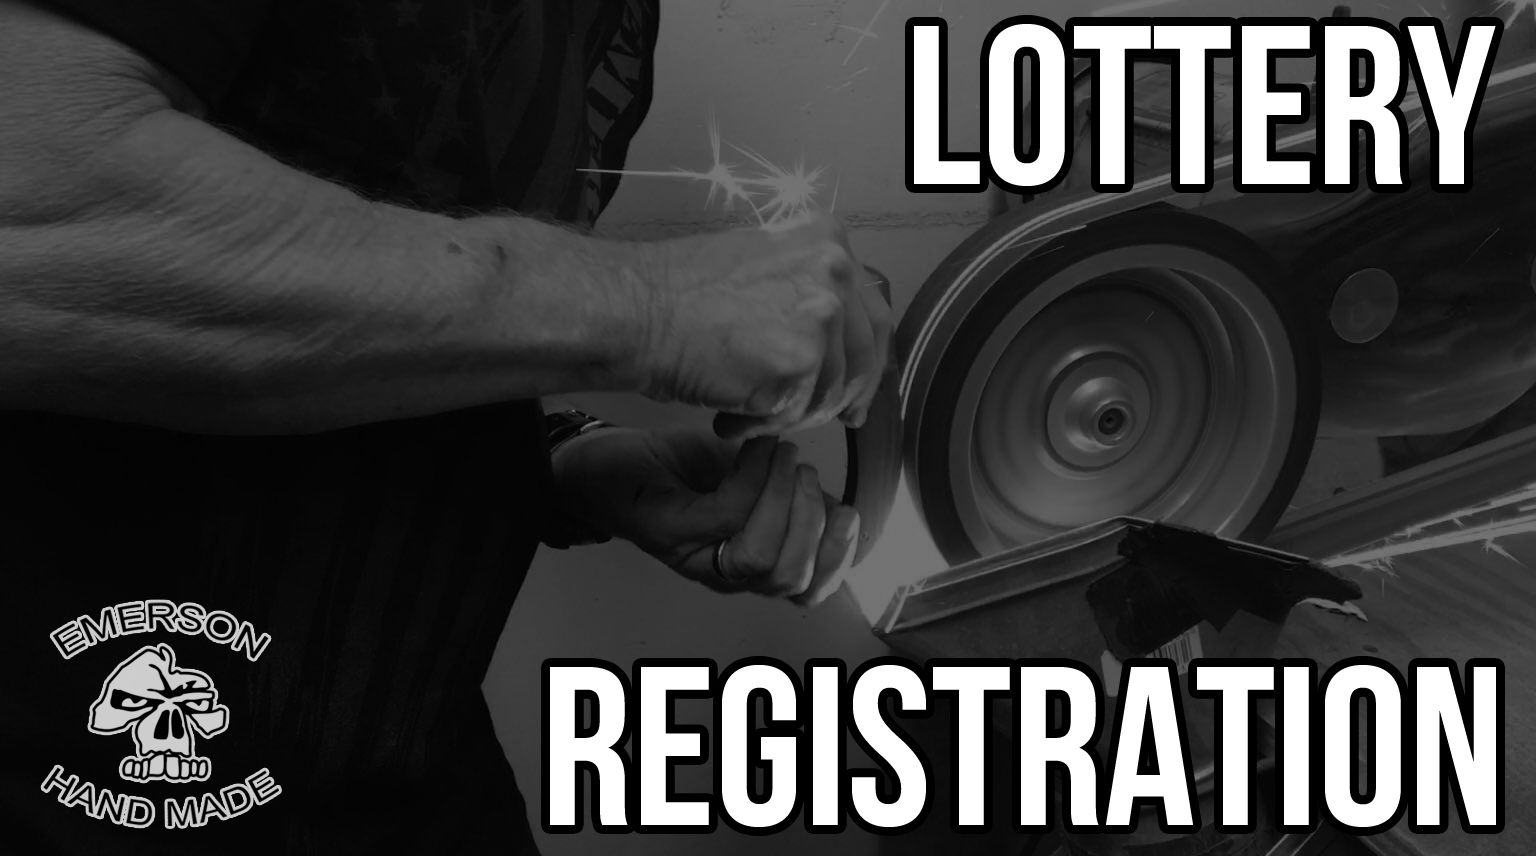 lottery Registration and auction image